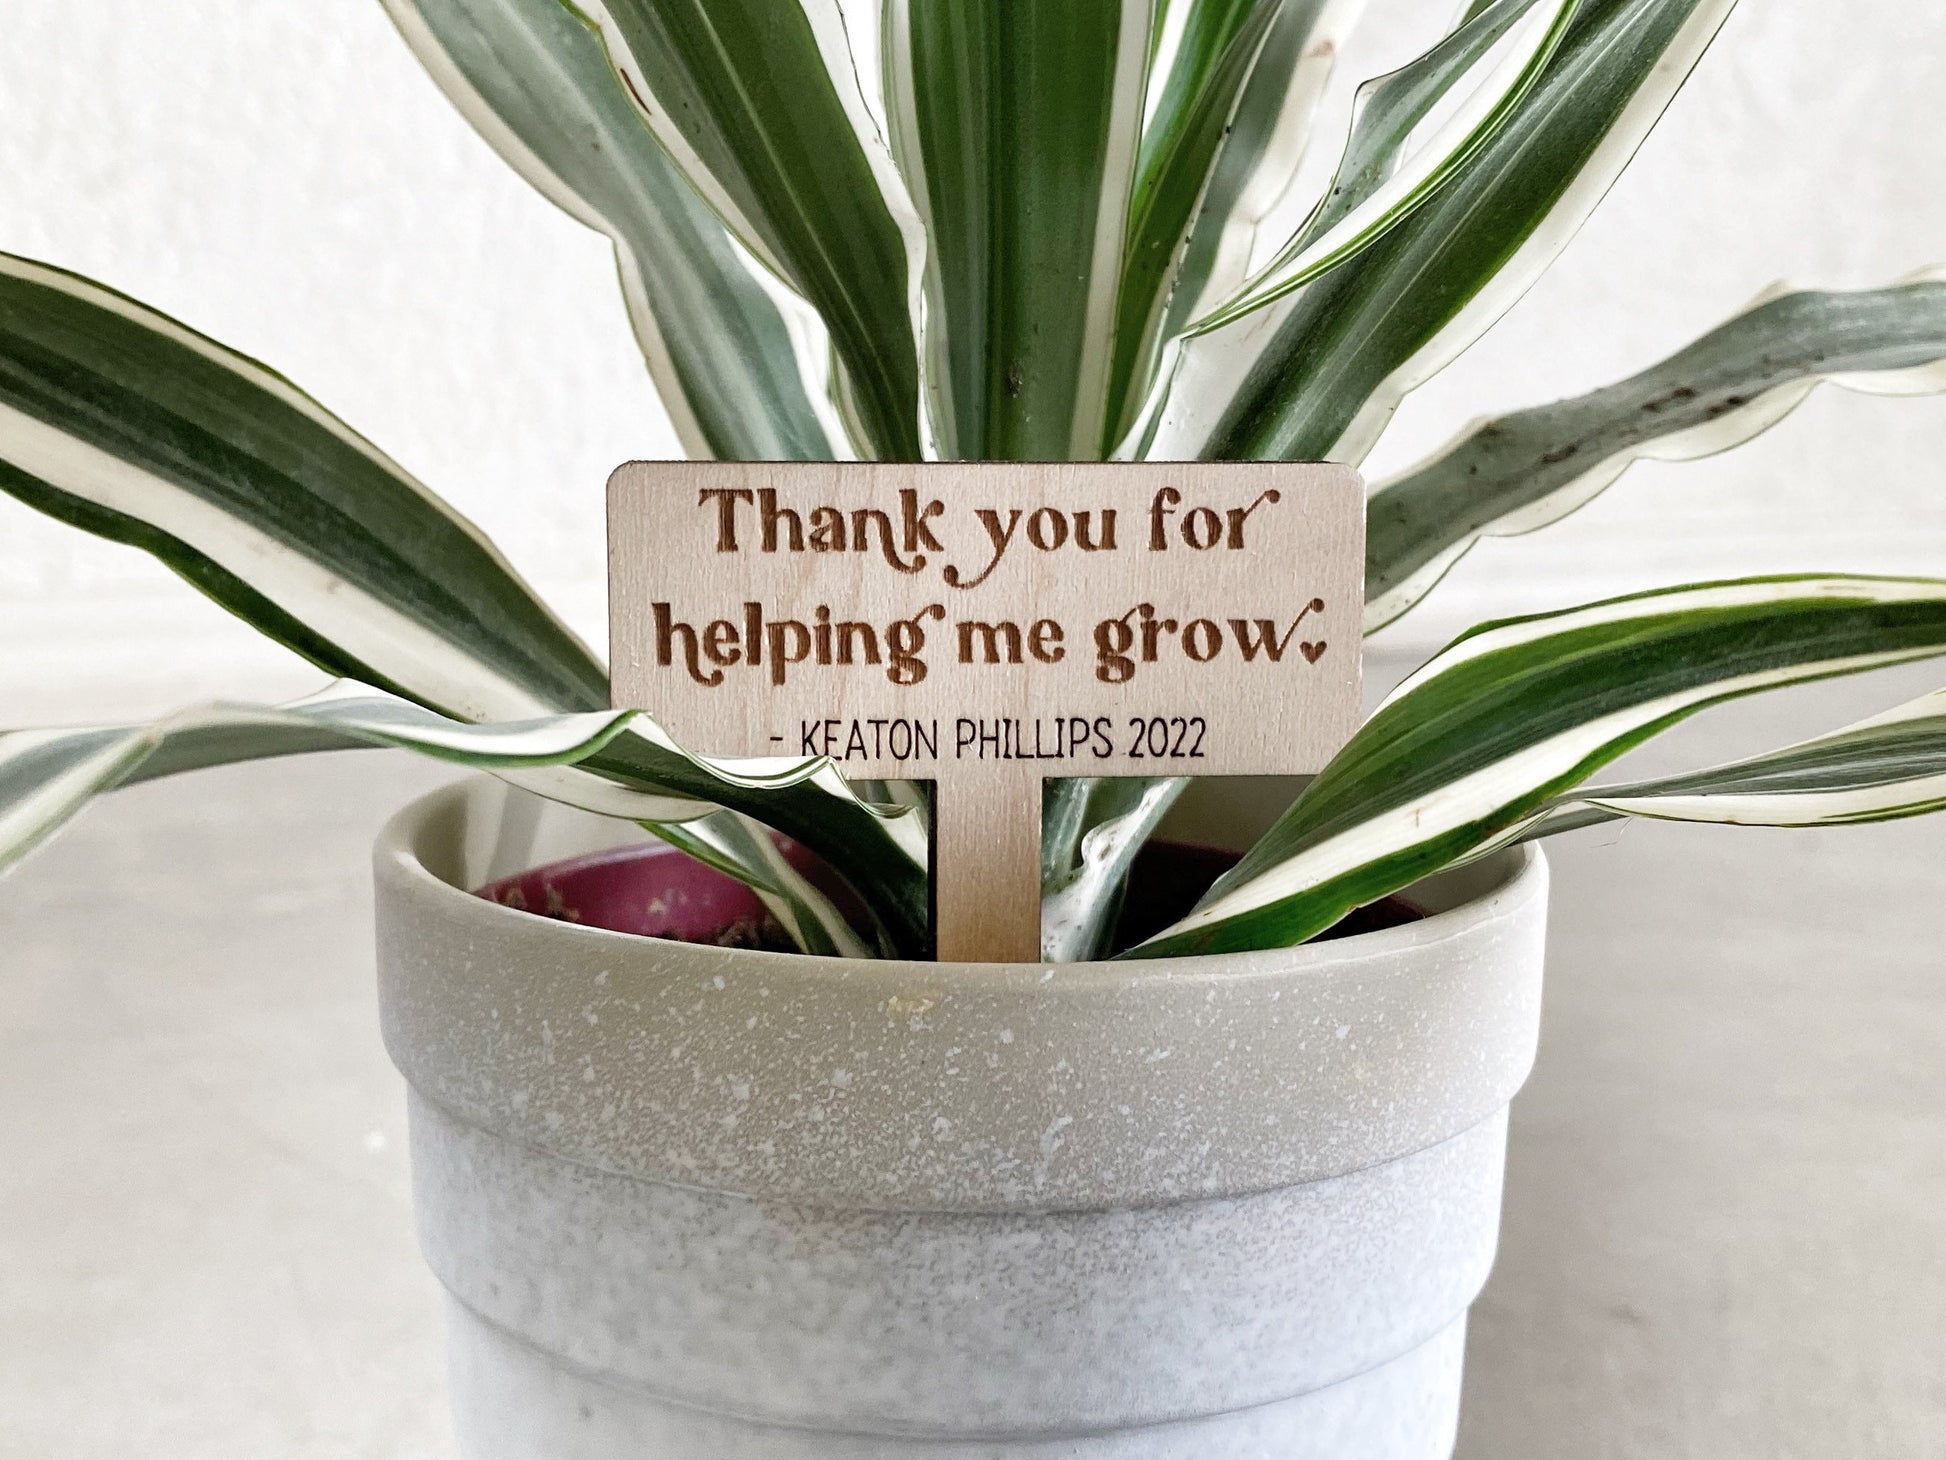 Personalized Teacher Plant Stake, Thank You For Helping Me Grow, Teacher Appreciation Gift, Mother's Day Gift, Last Day of School Gift